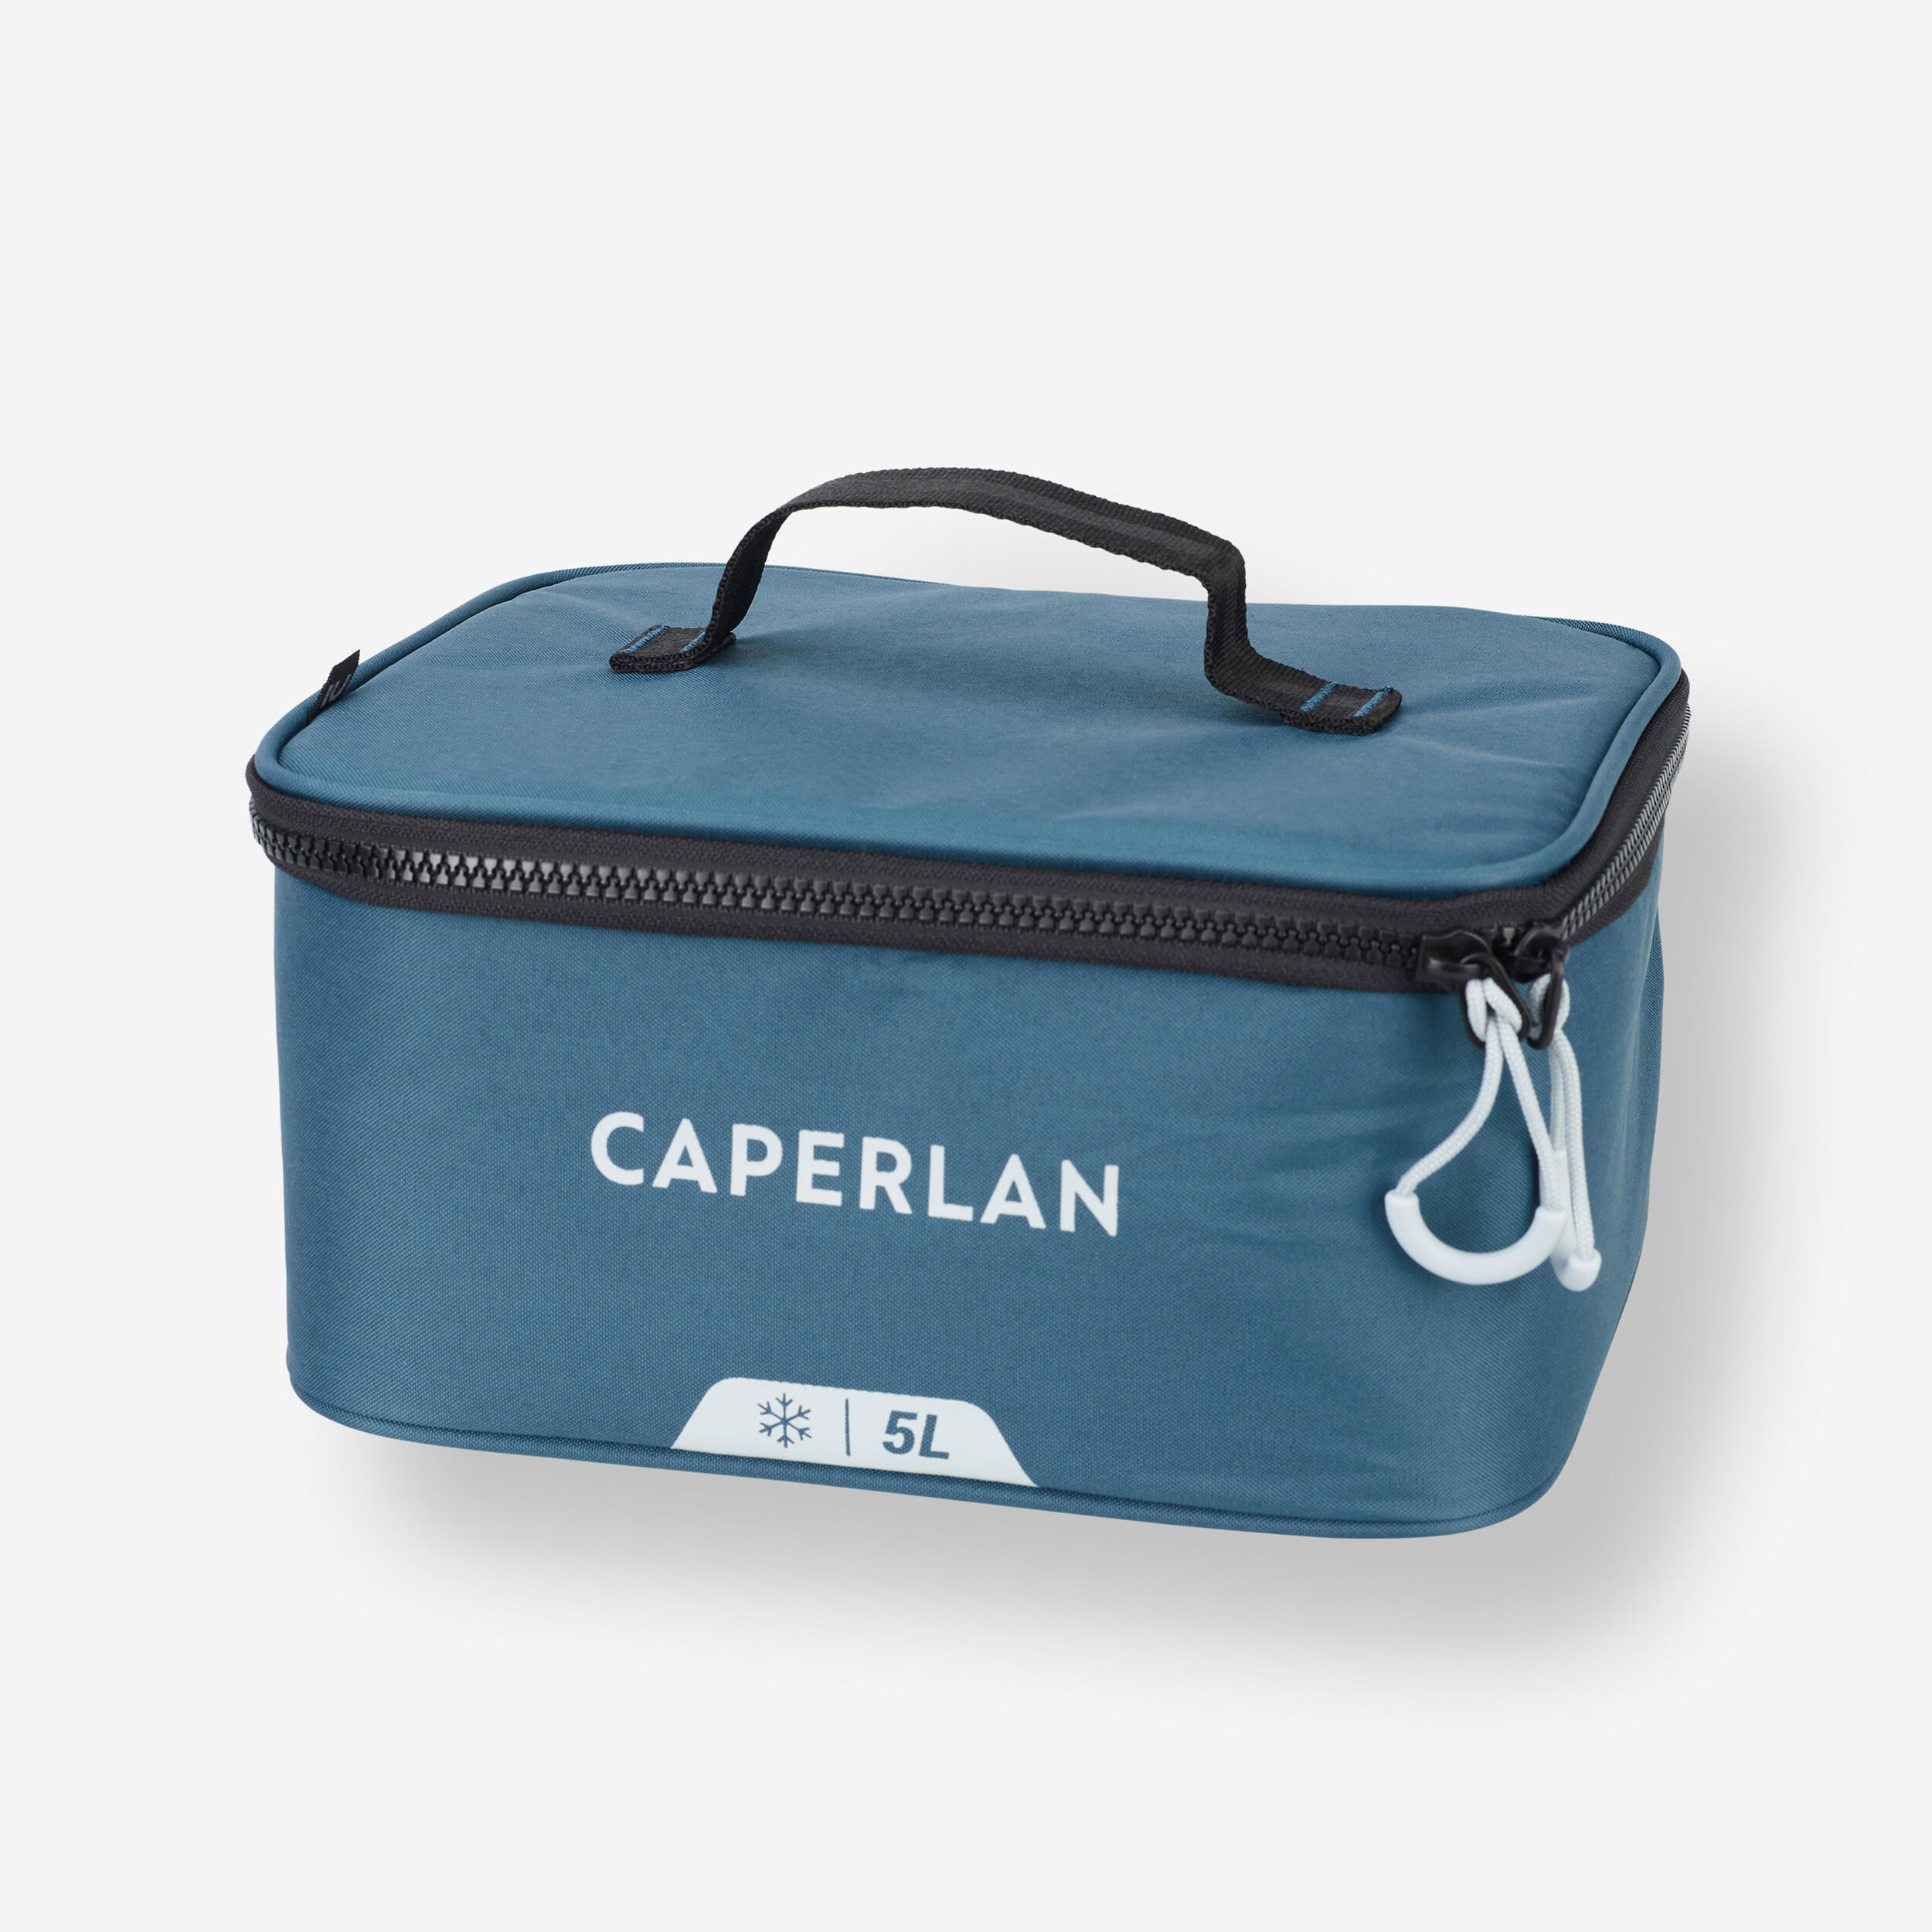 CAPERLAN Fishing 5L Flexible Ice Pack S - Keeps cool for 2 hours 20 minutes - 5L